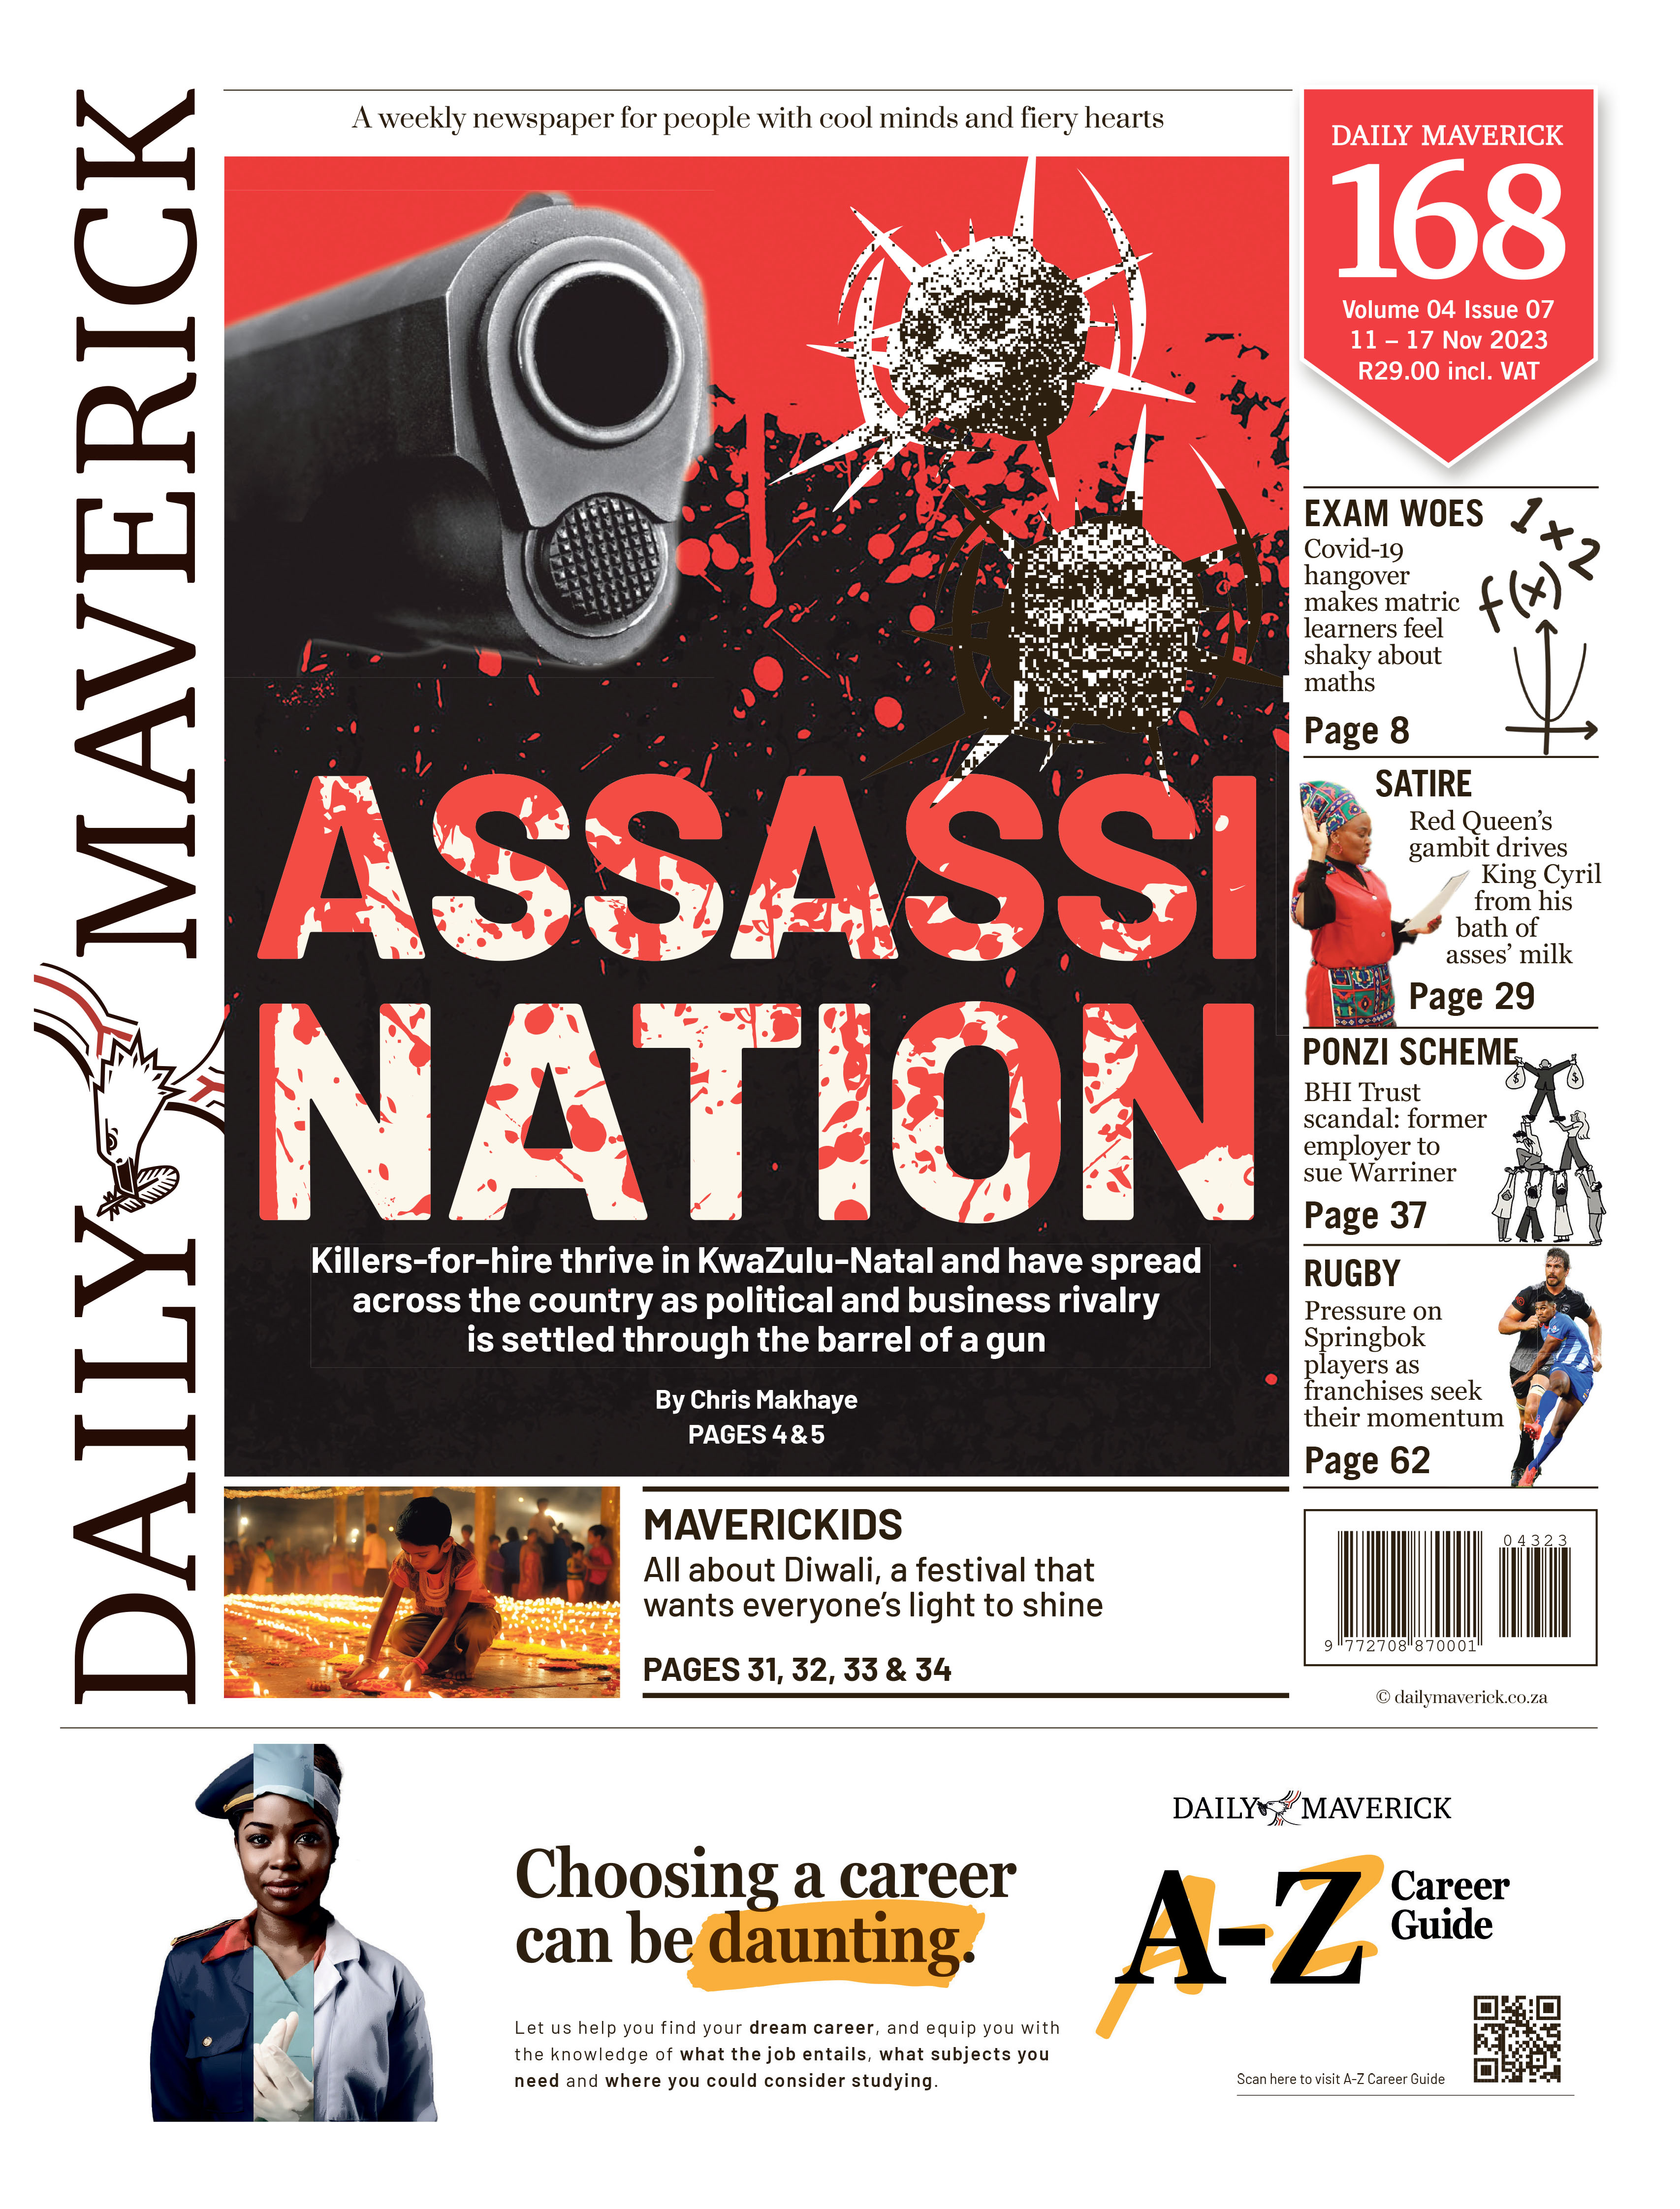 DM168 front page